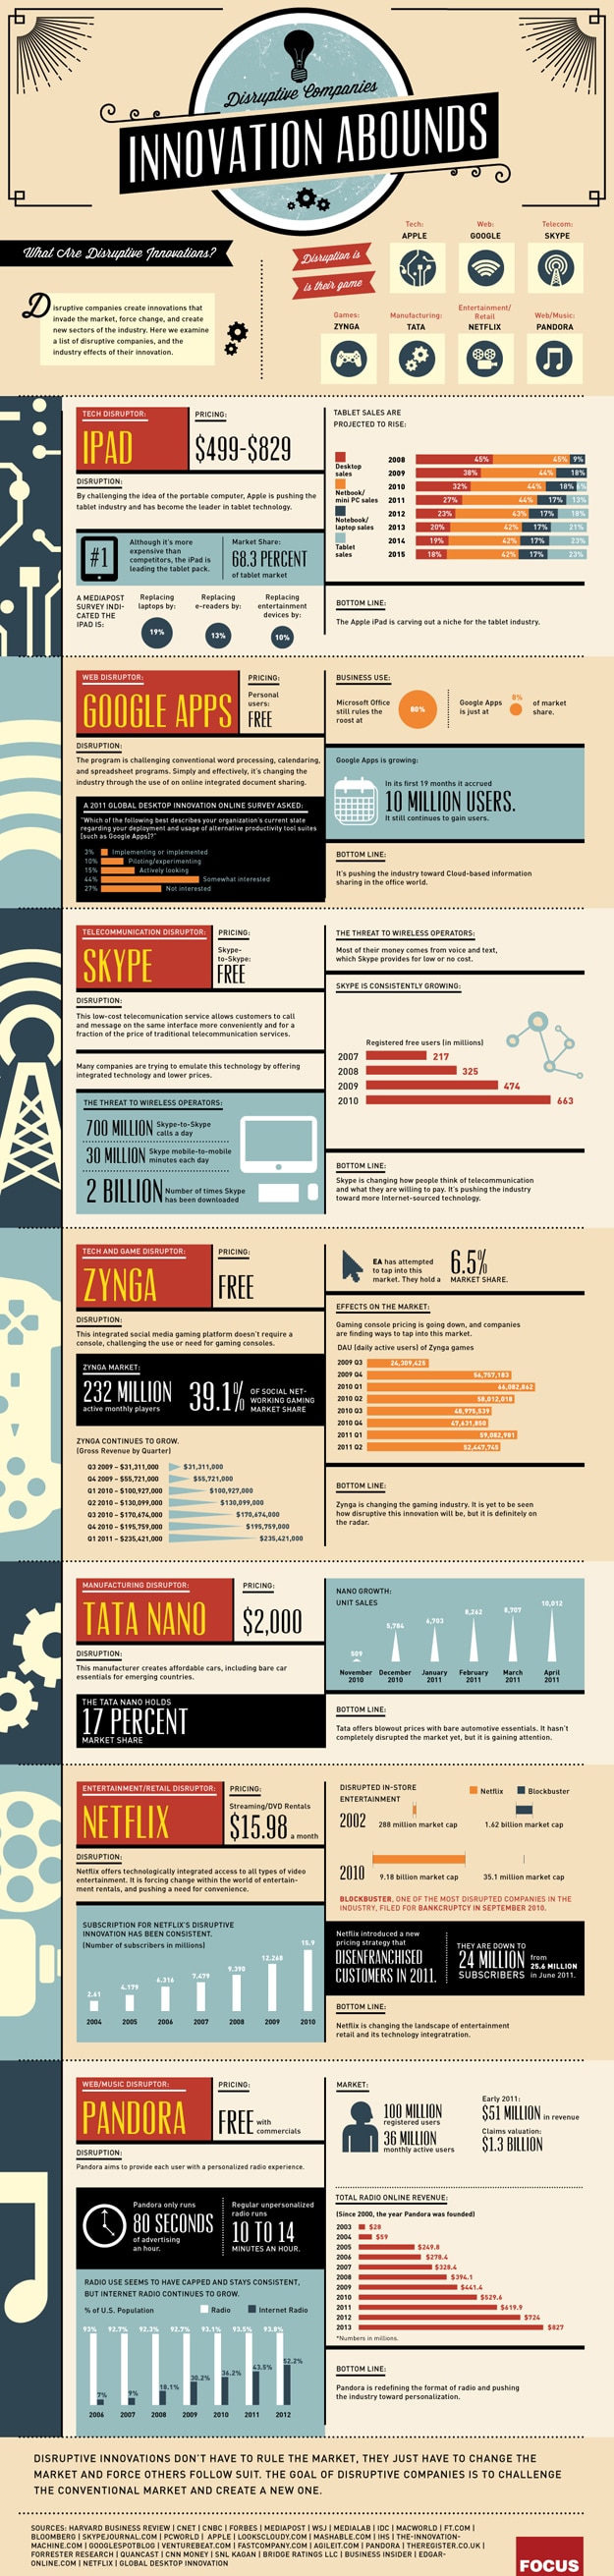 The Most Innovative & Disruptive Tech Companies [Infographic]